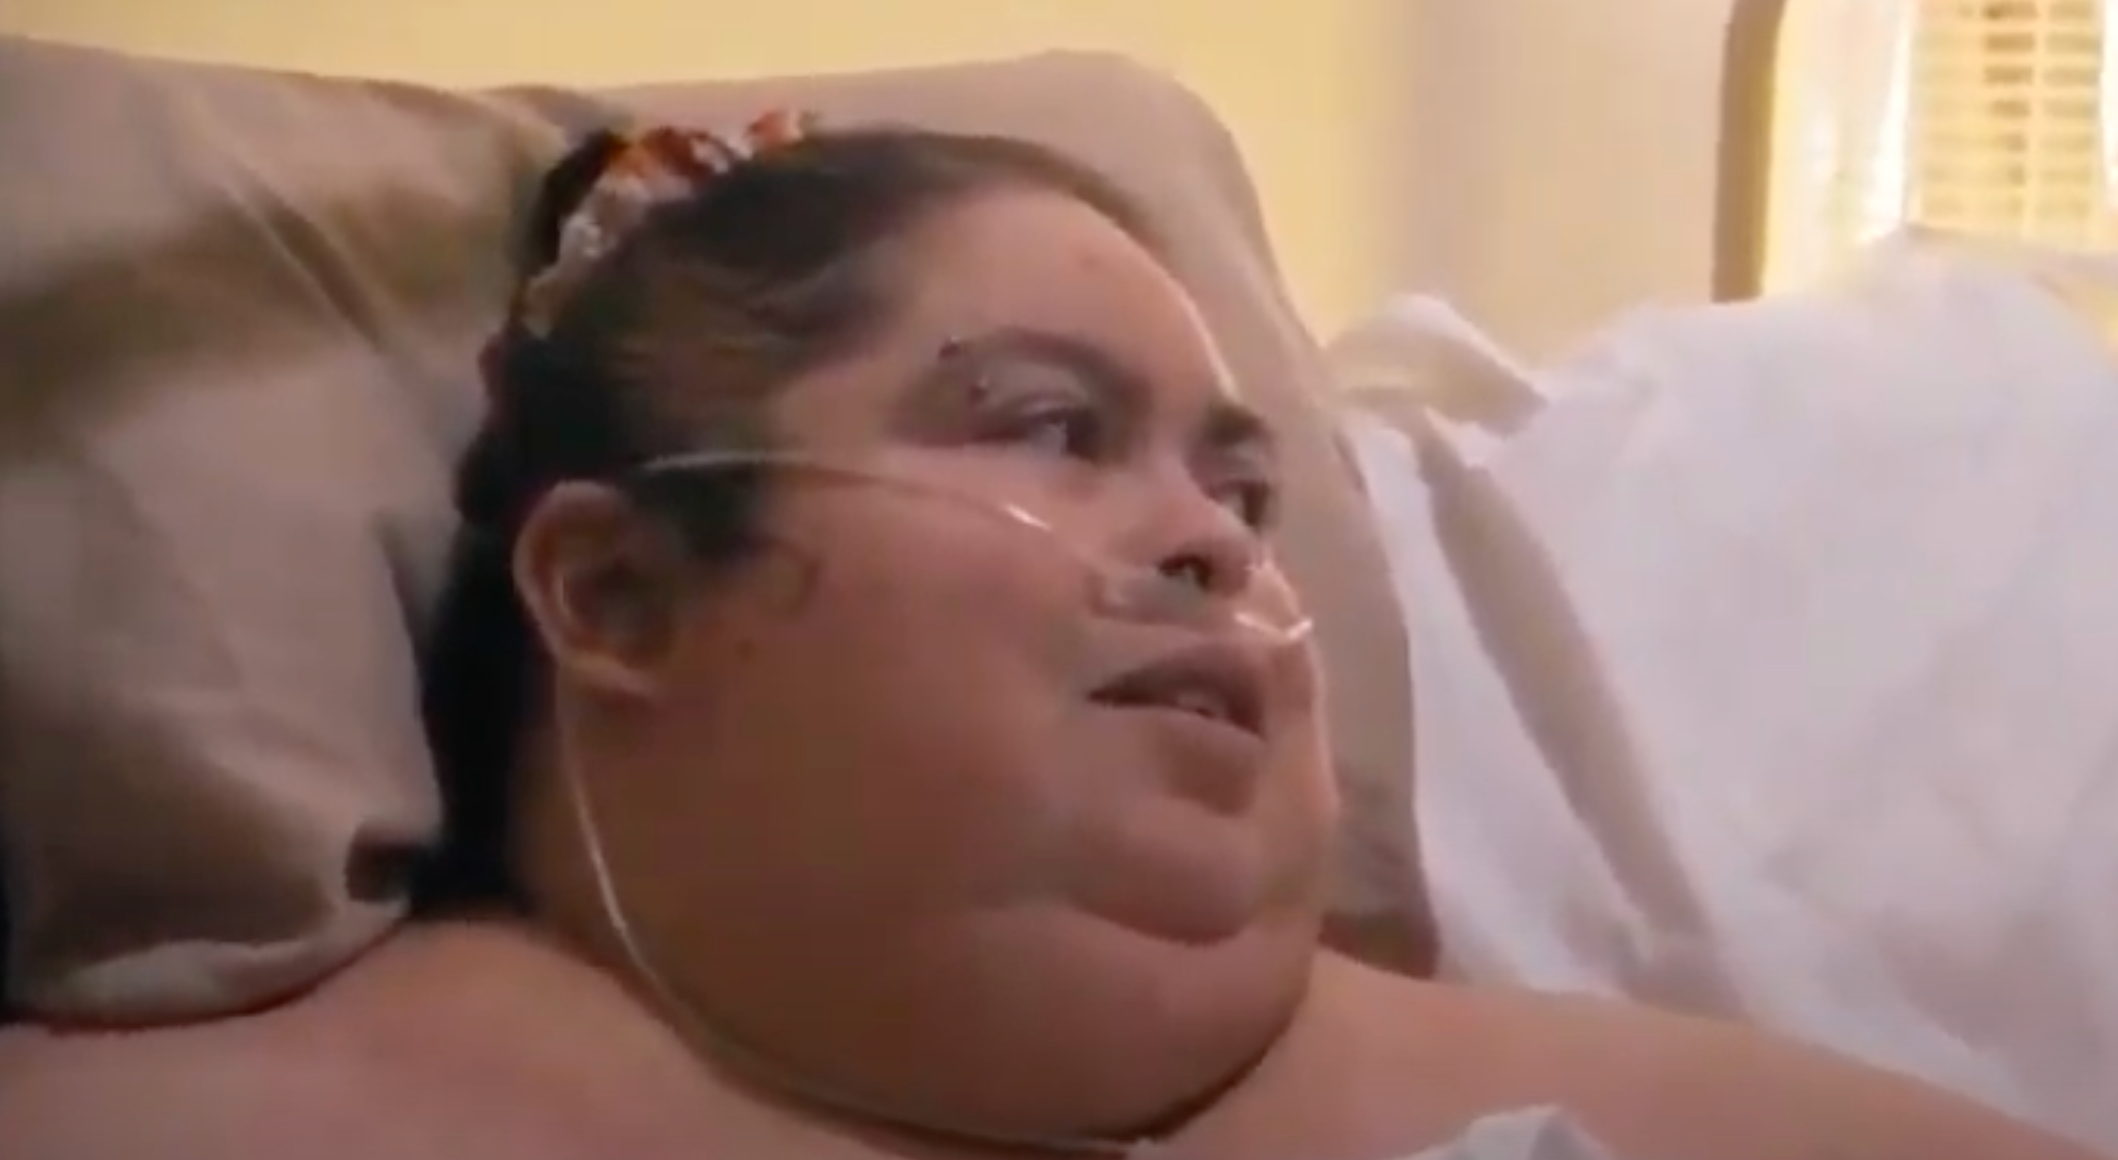 Cynthia from my 600 pound life